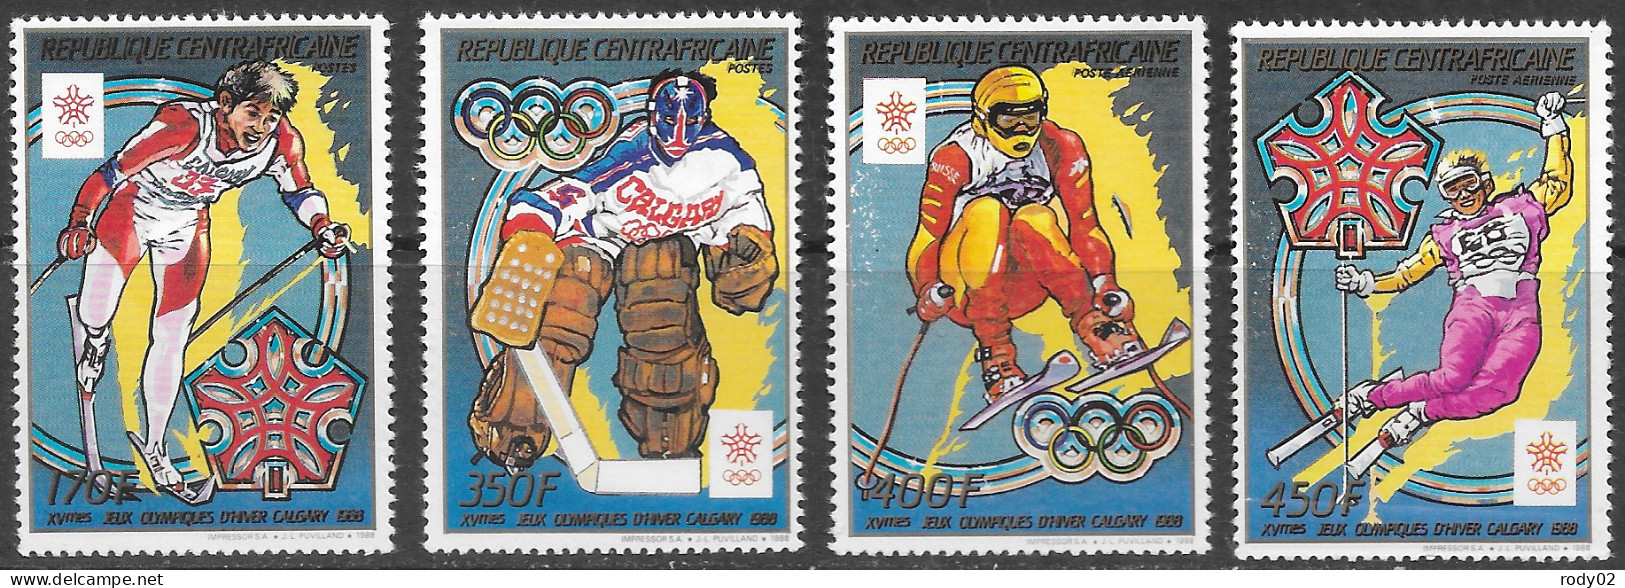 CENTRAFRIQUE - JEUX OLYMPIQUES D'HIVER A CALGARY - N° 795 A 796 ET PA 377 A 378 - NEUF** MNH - Inverno1988: Calgary